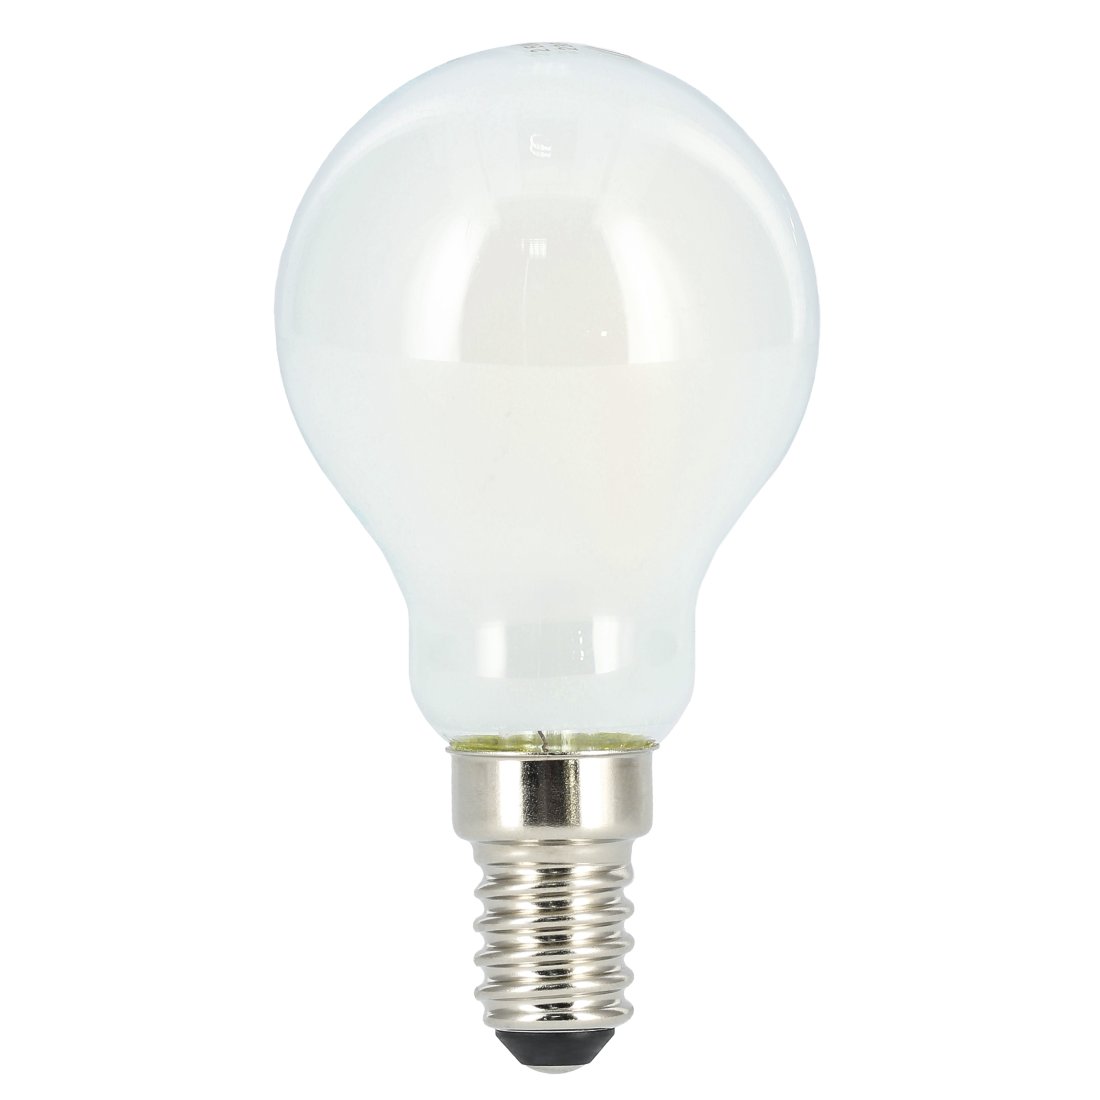 abx High-Res Image - Xavax, LED Filament, E14, 470 lm Replaces 40W, Drop Bulb, Matt, warm white, dimmable